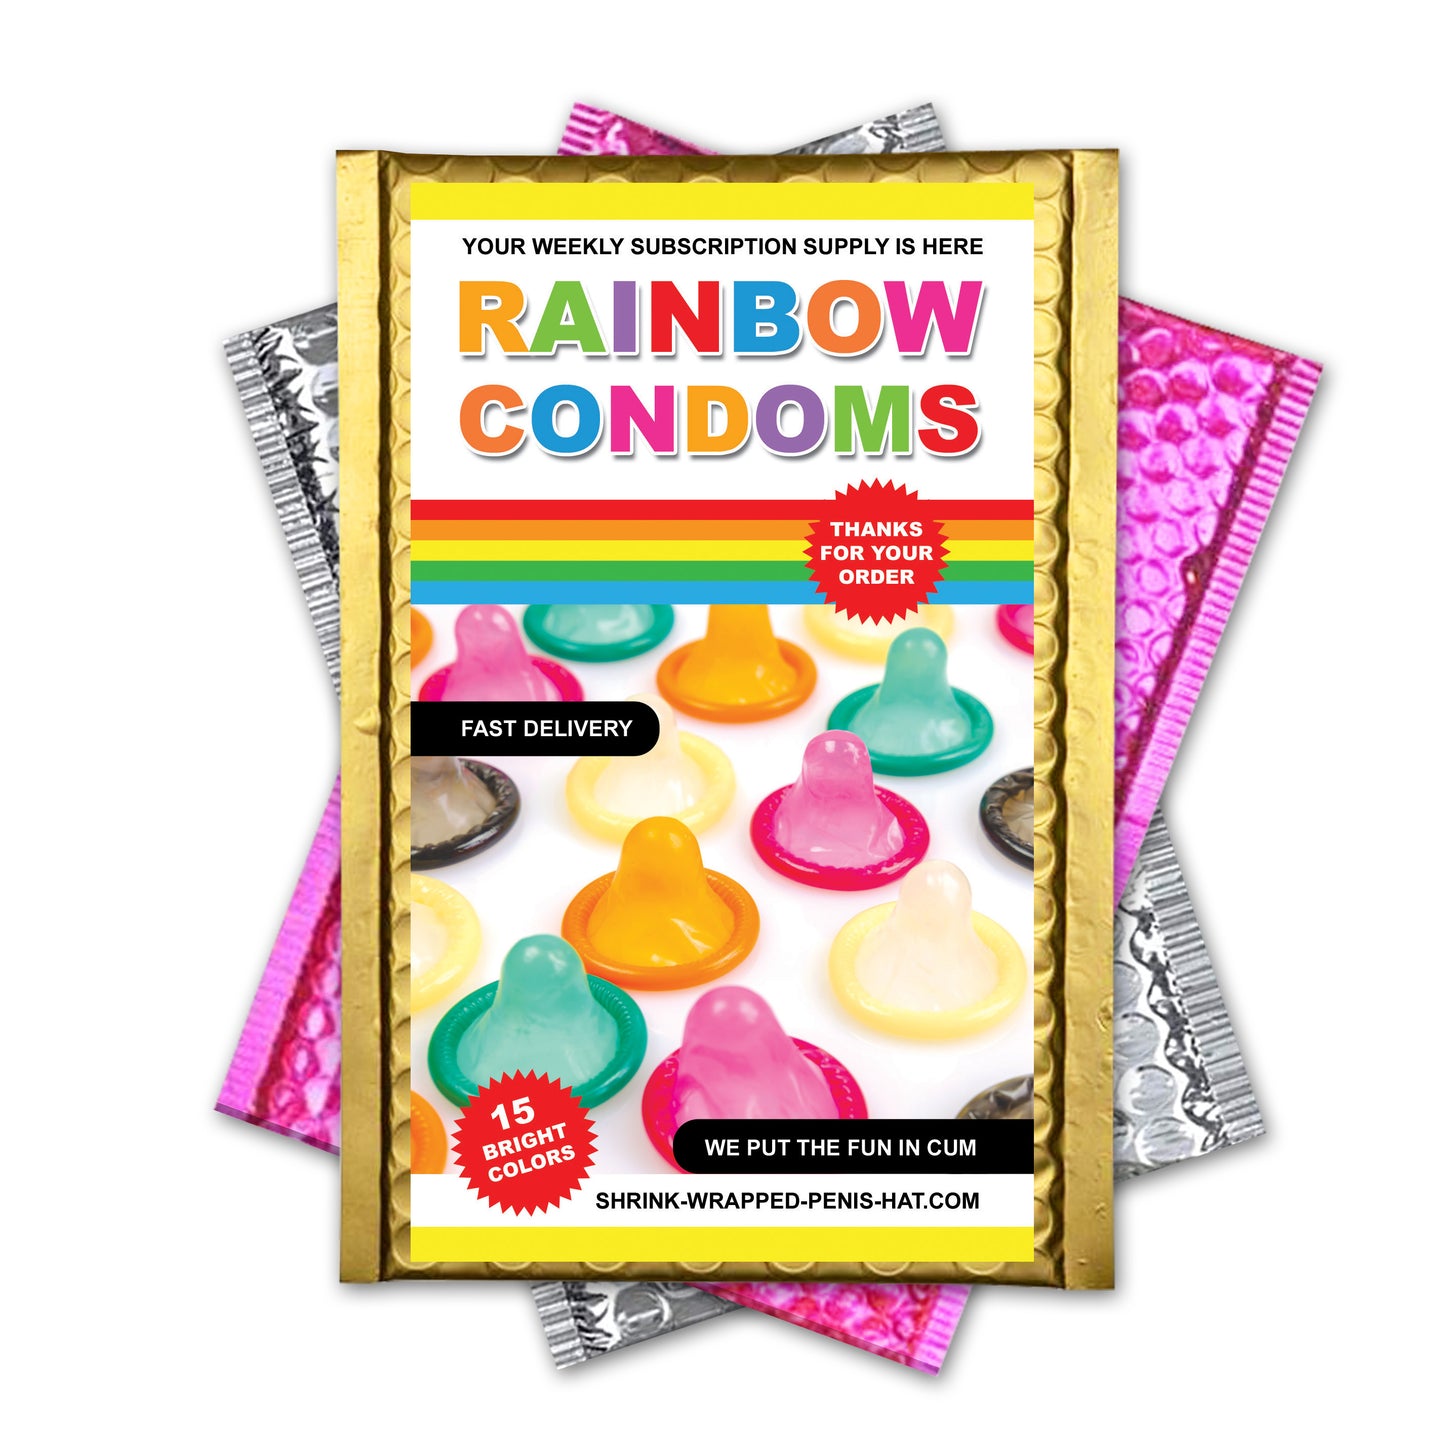 Weekly Subscription Condoms Prank Mail